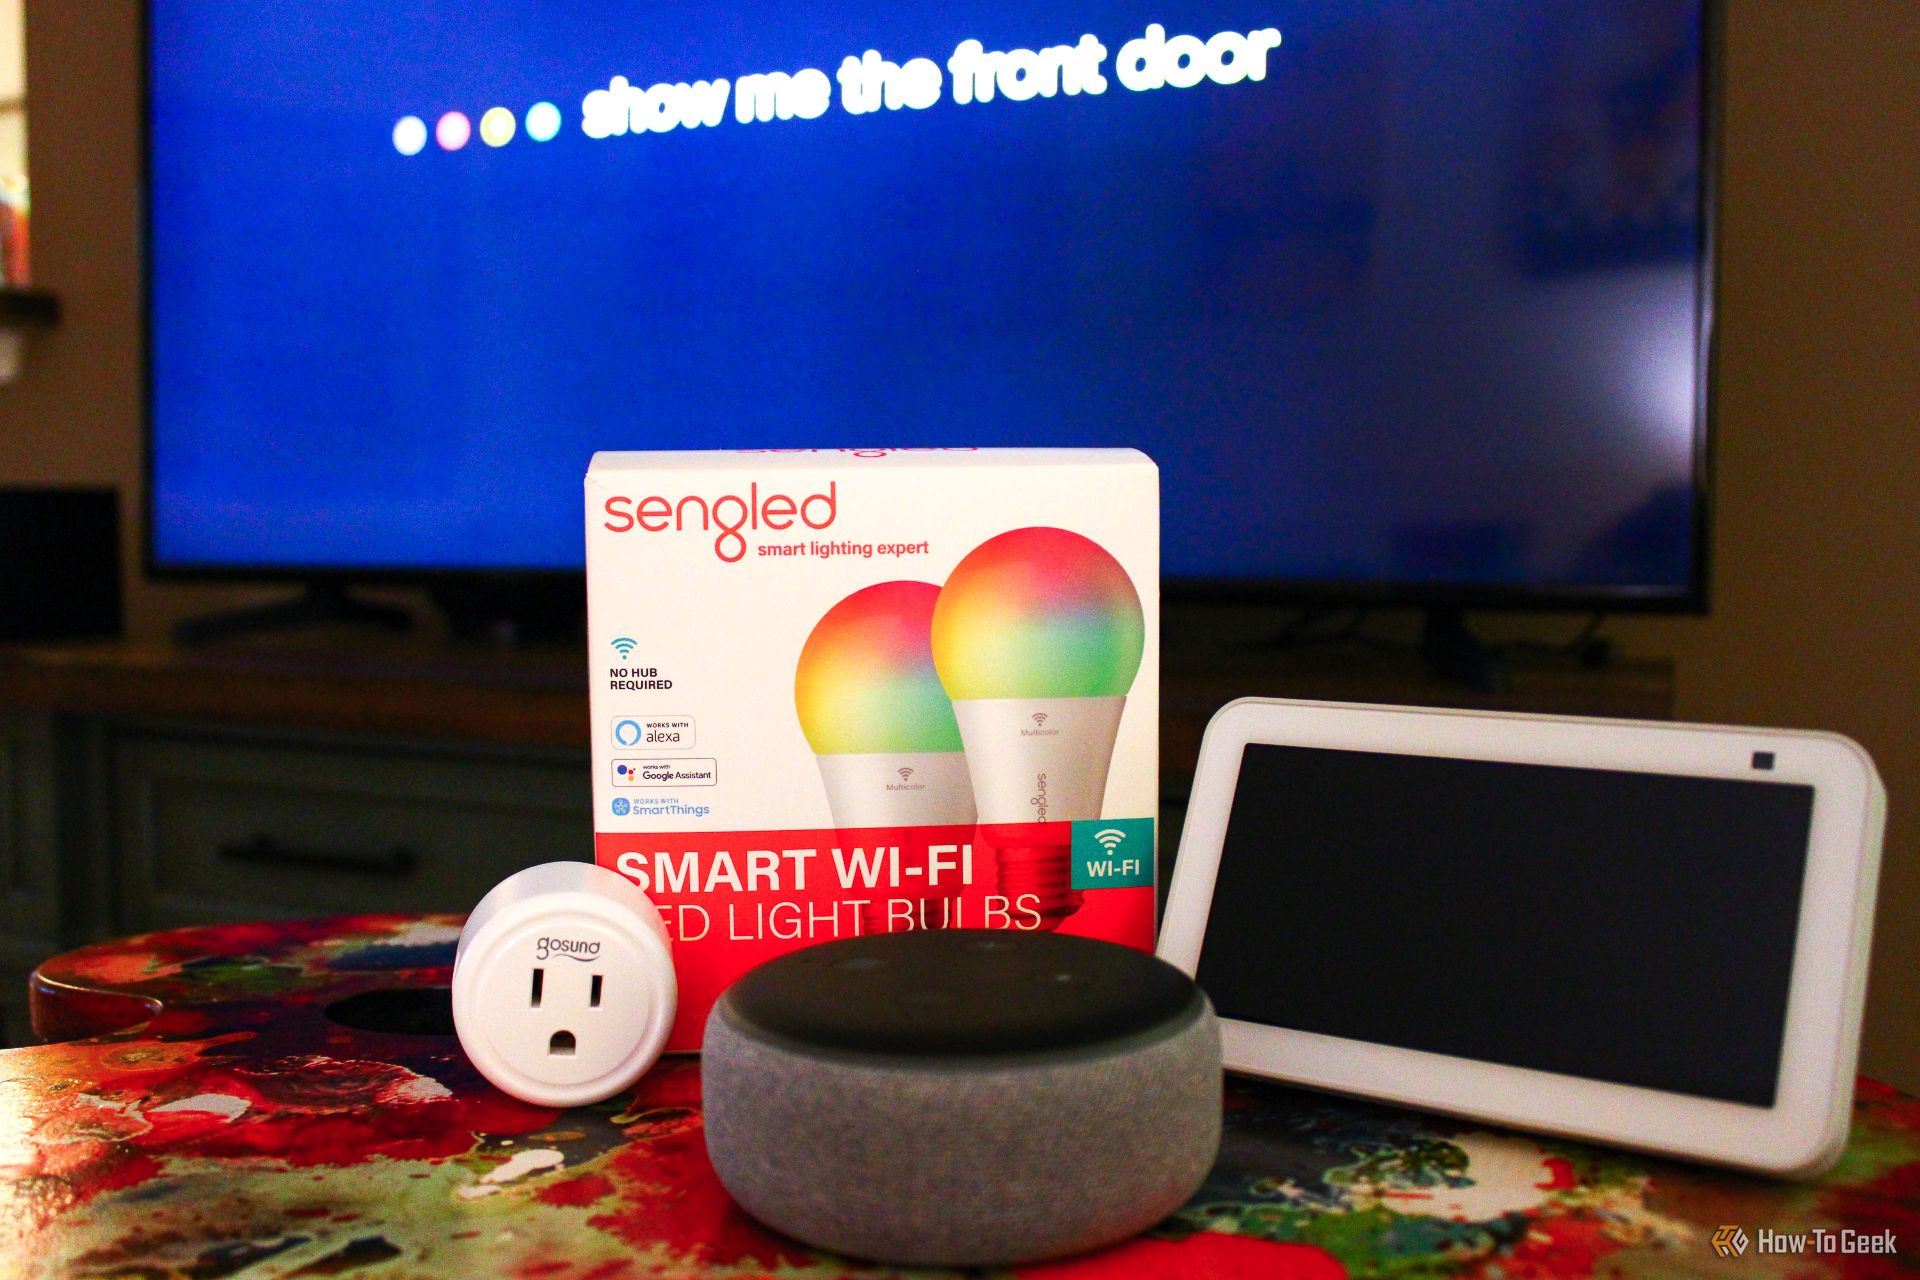 A smart TV flanked by an Echo Dot and Echo Show, a smart plug, and smart light bulbs.